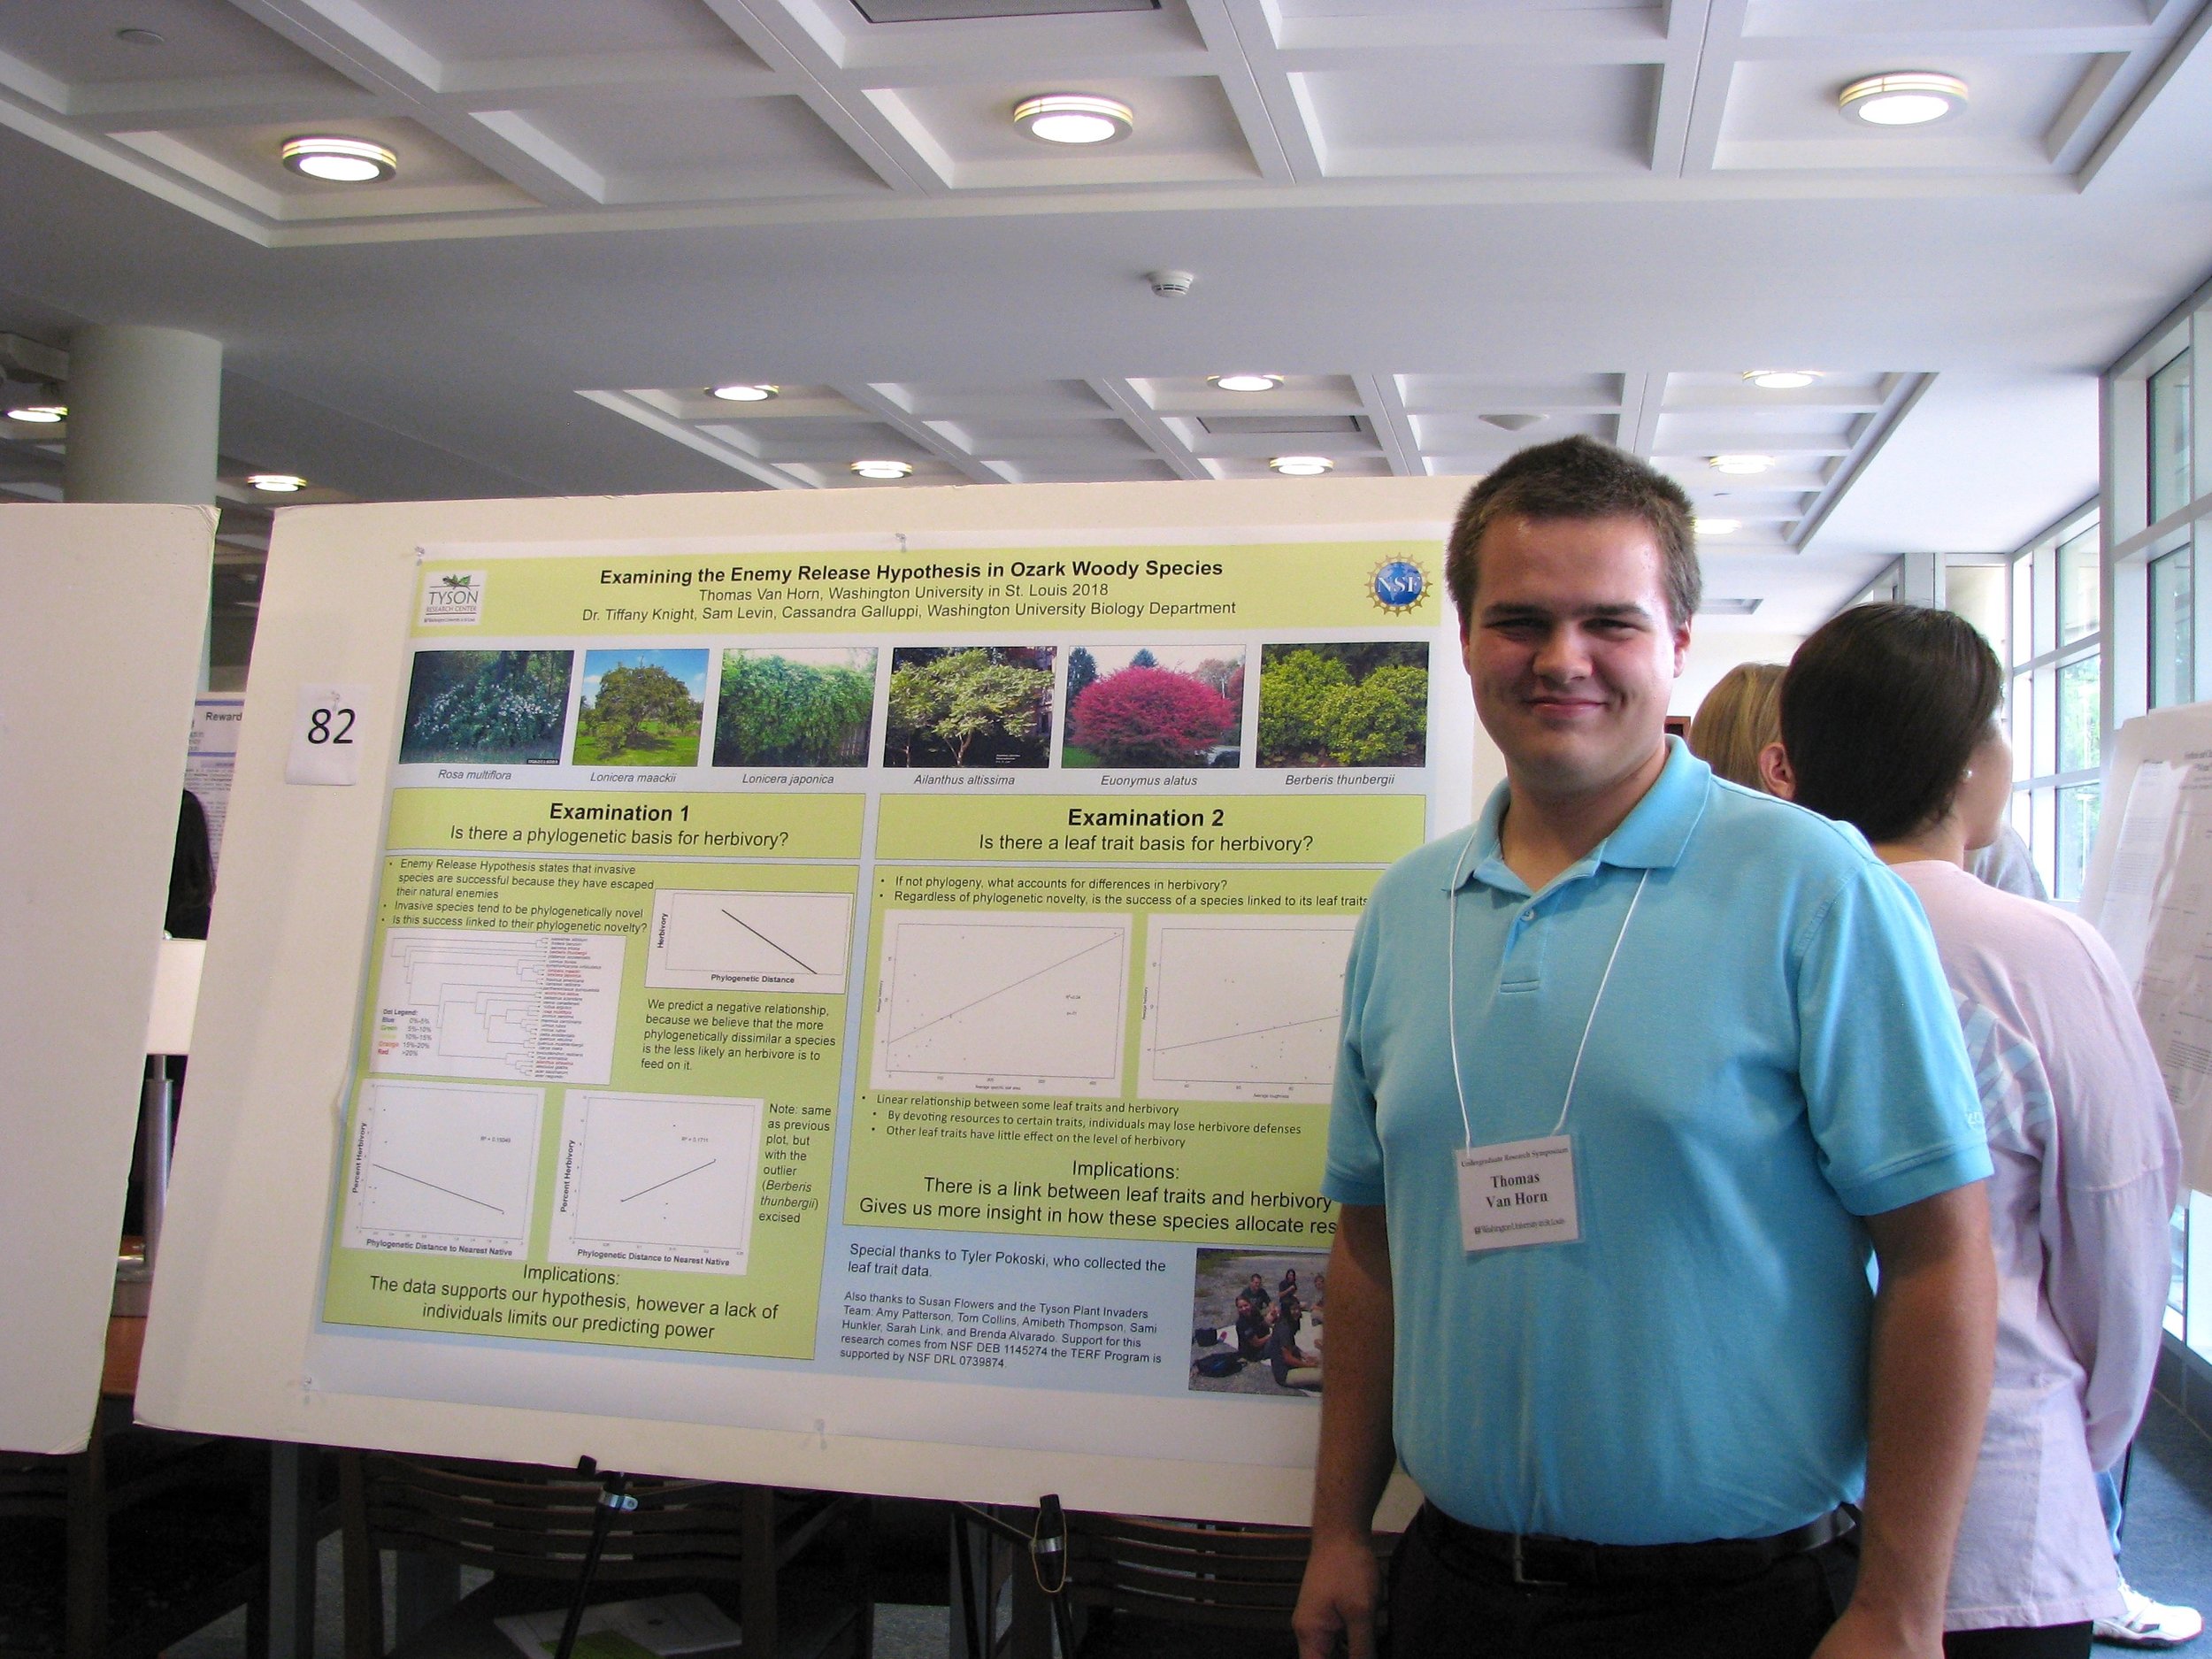  Presenting research as an uberTERFer at the WashU Undergraduate Research Symposium in October 2014 